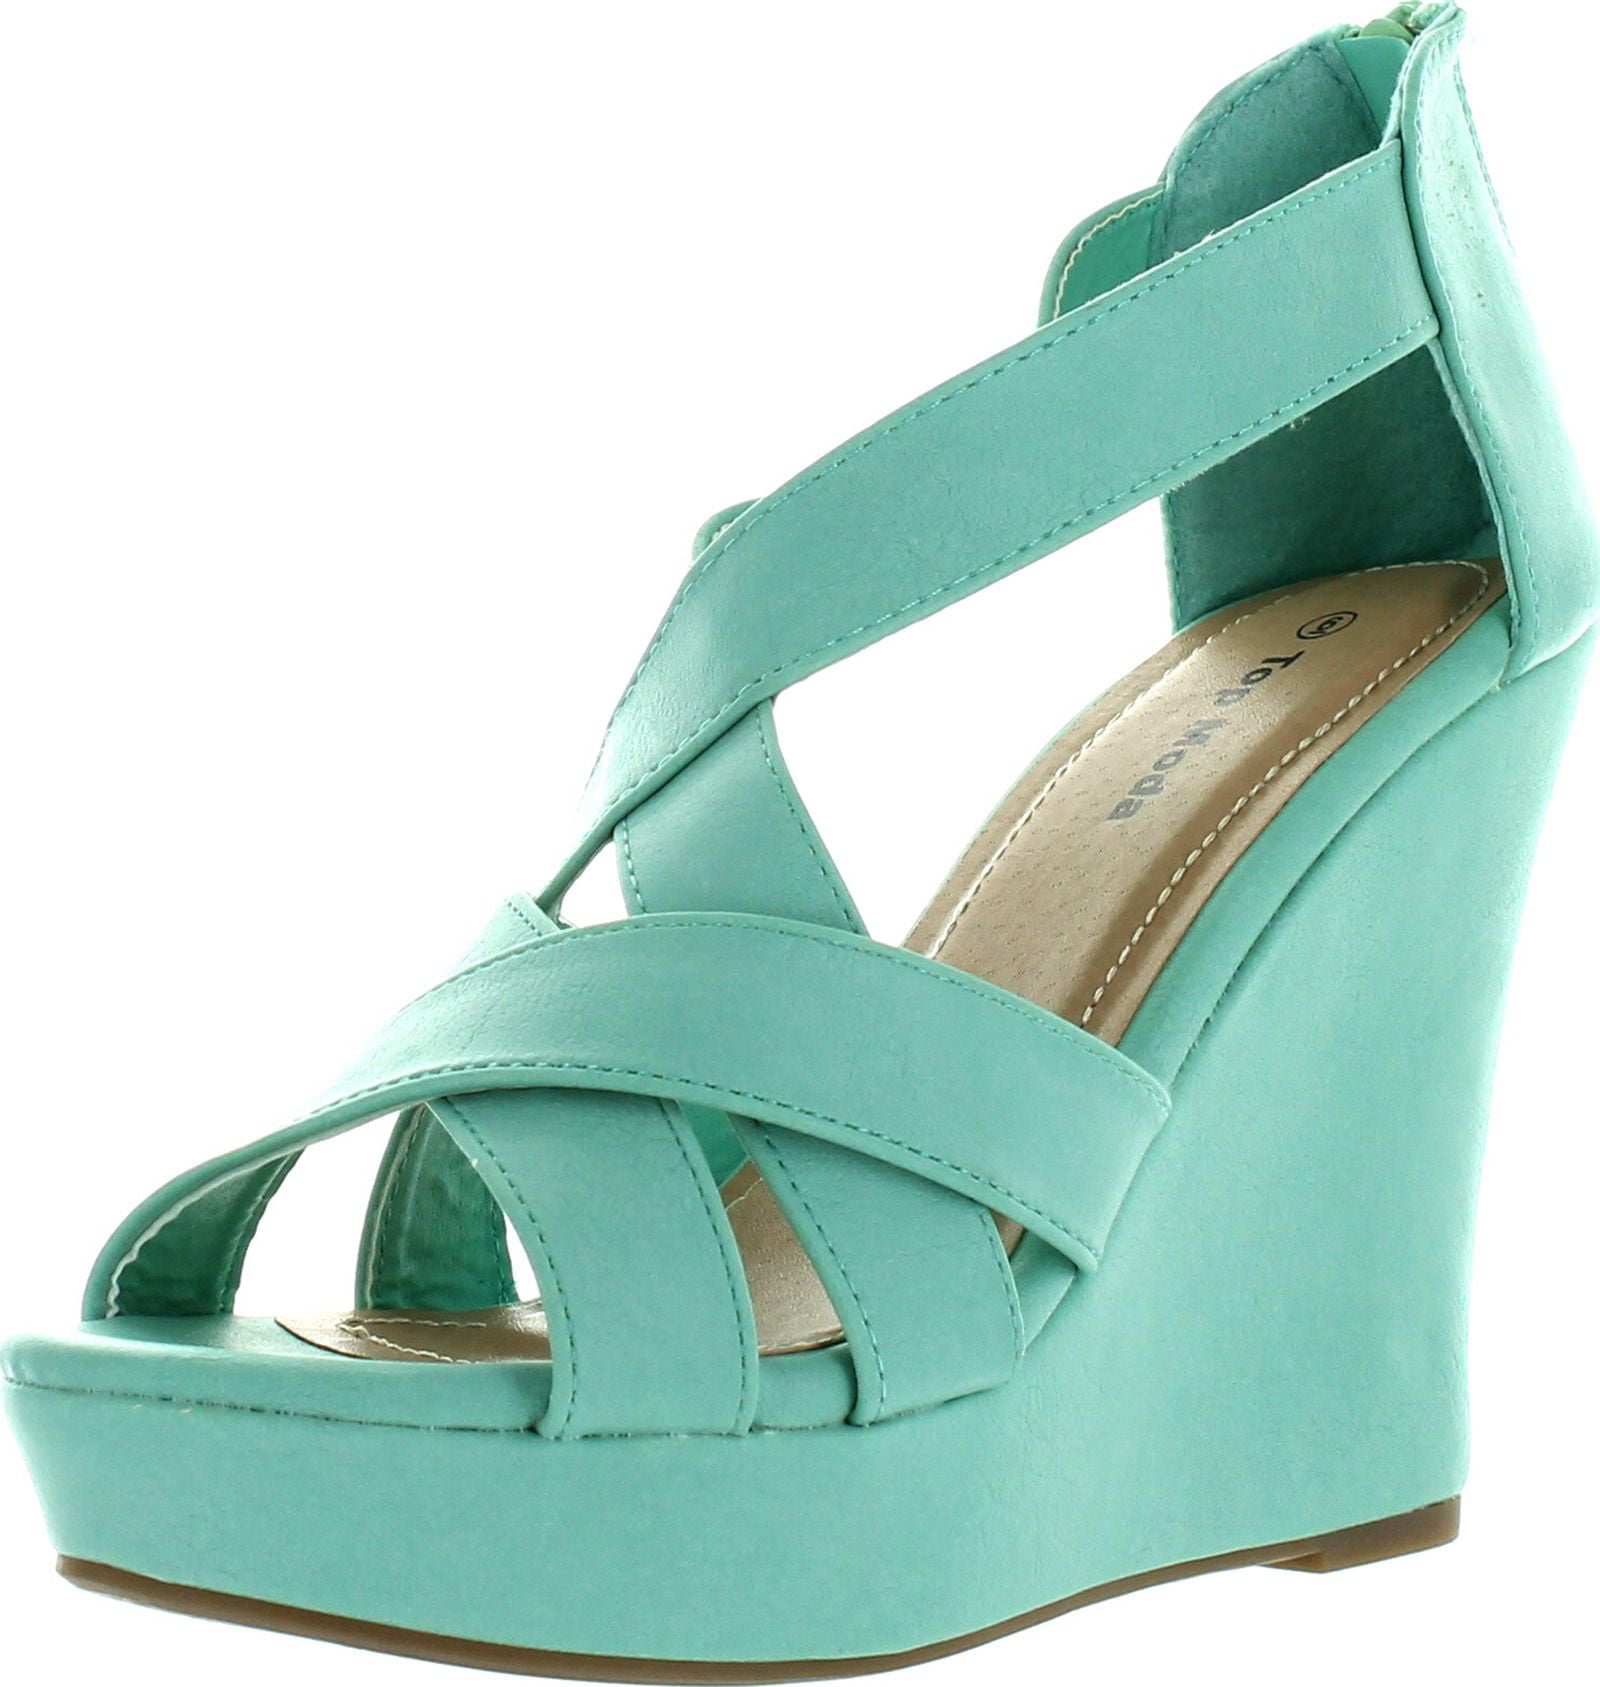 teal wedge shoes